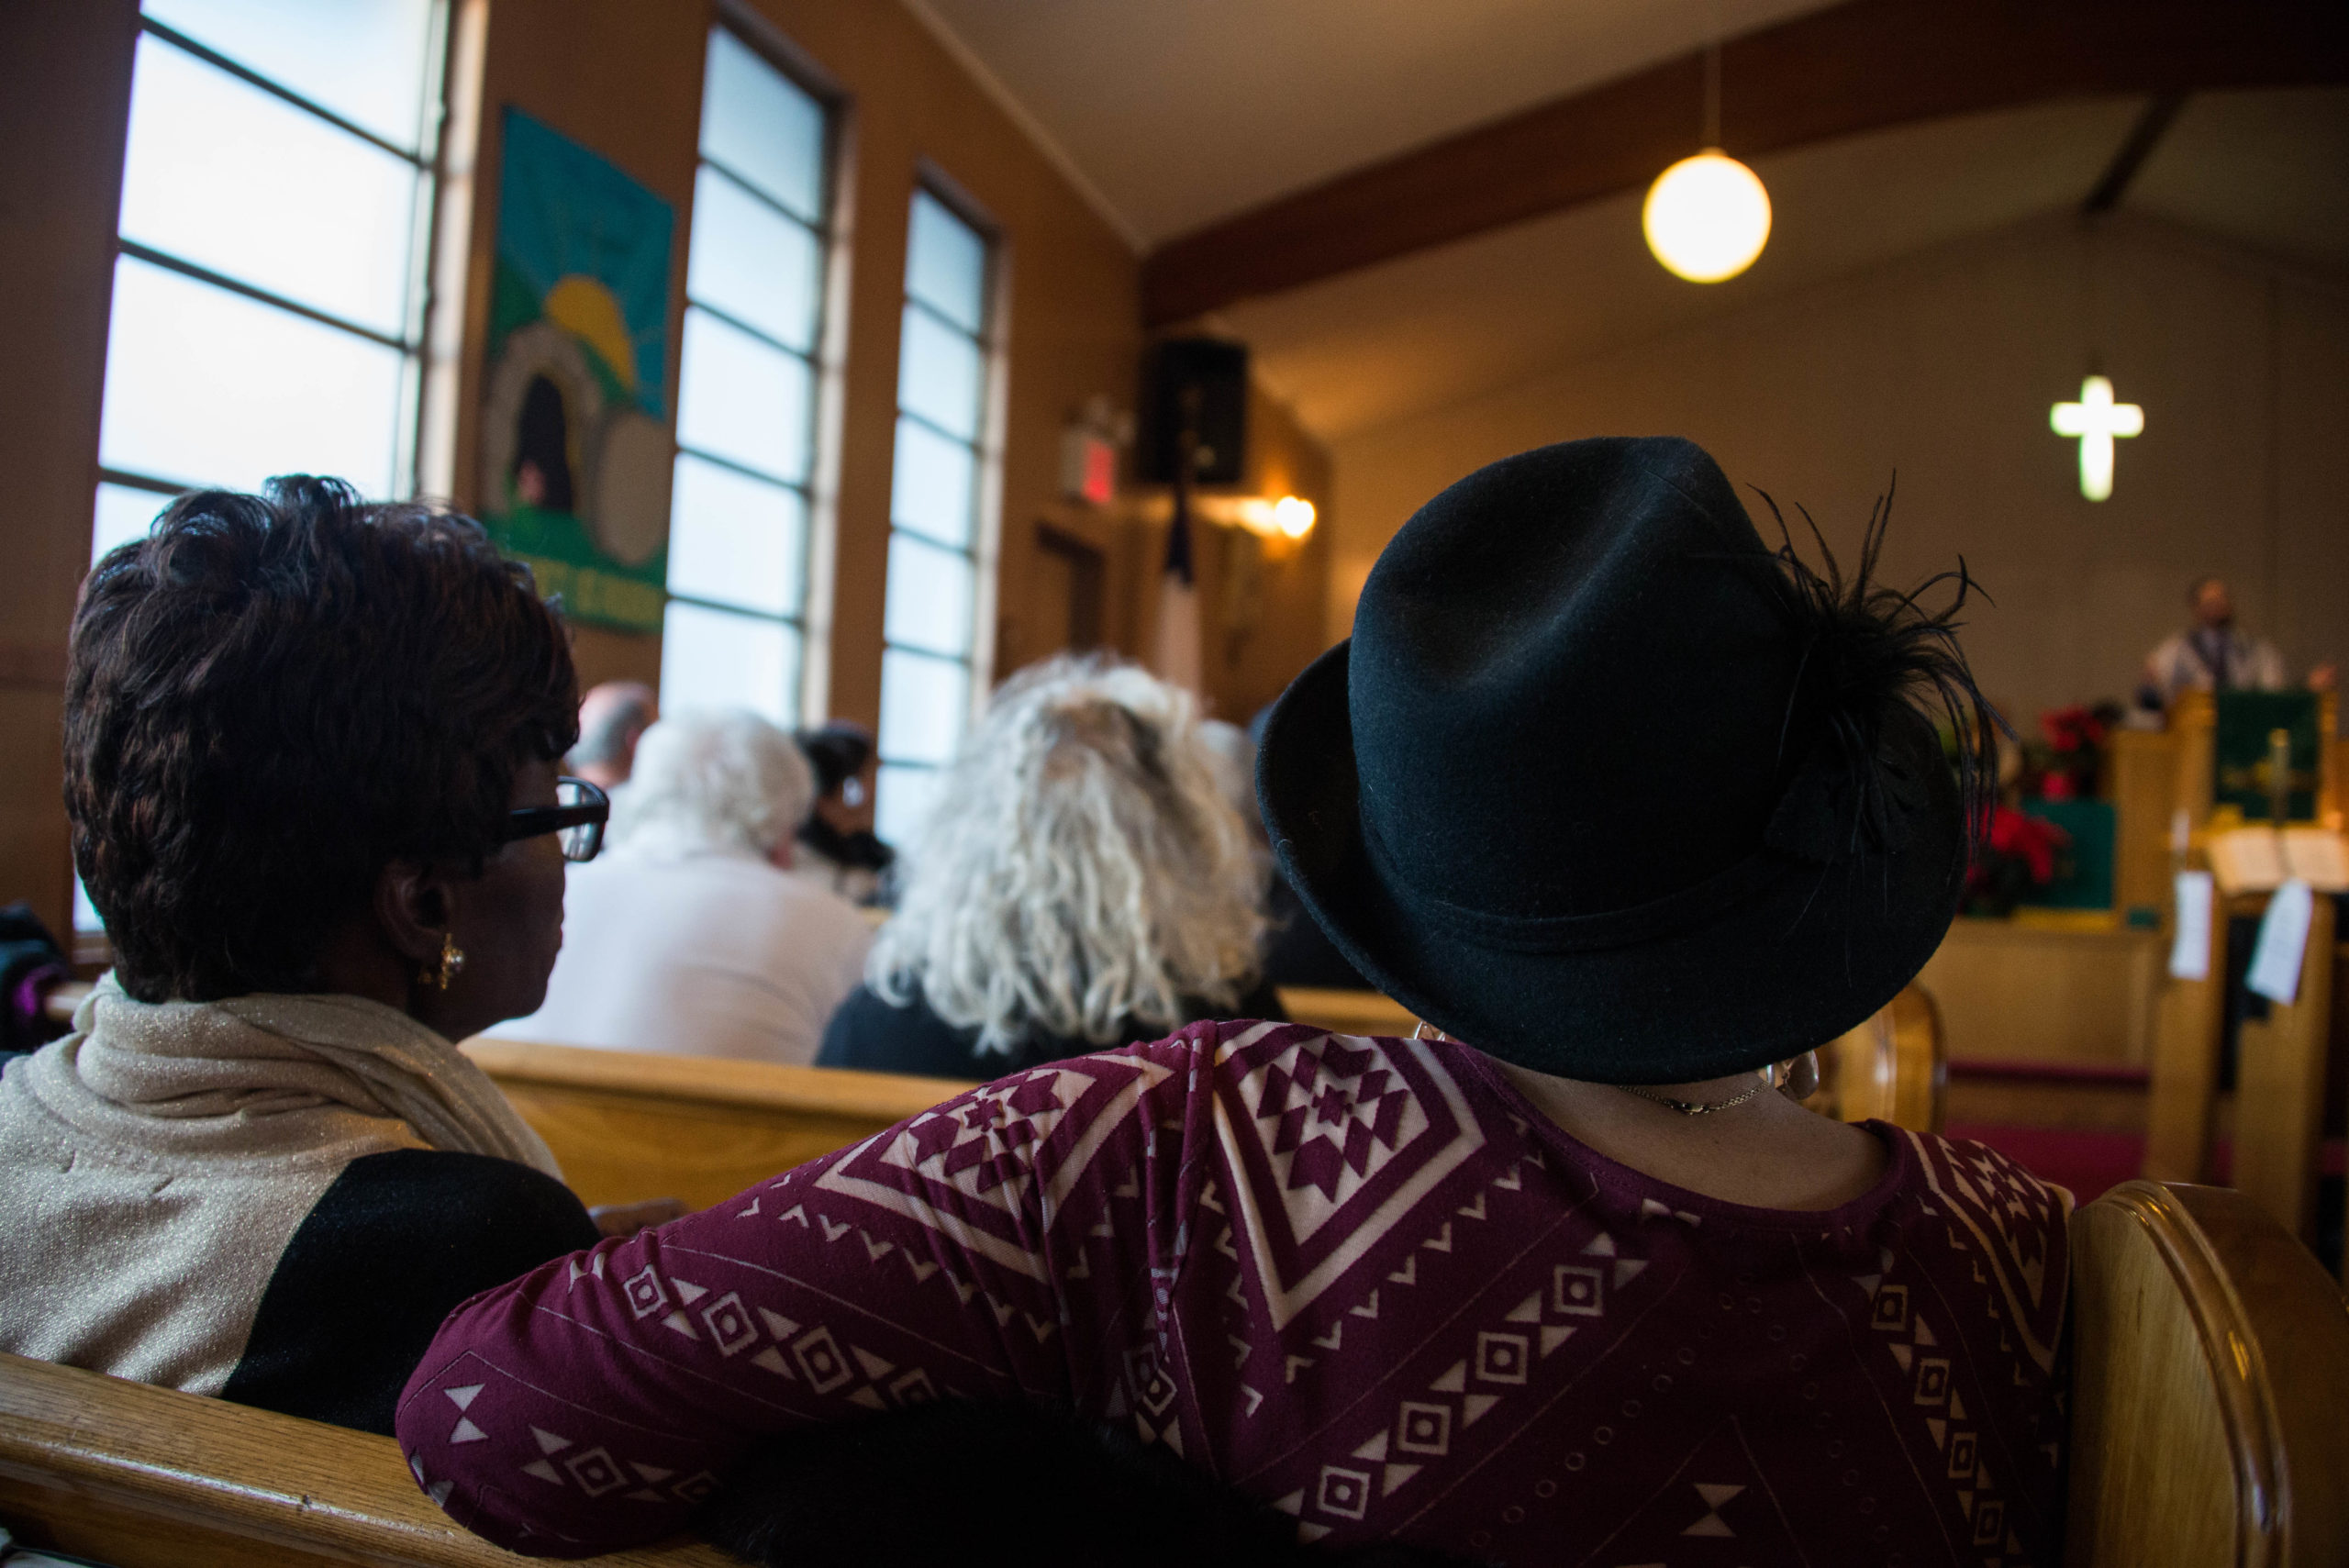 People from a variety of different faiths and backgrounds filled St. Paul A.M.E. Zion Church of Great Neck on Sunday, commemorating the legacy of Dr. Martin Luther King Jr. (Photo by Demi Guo)